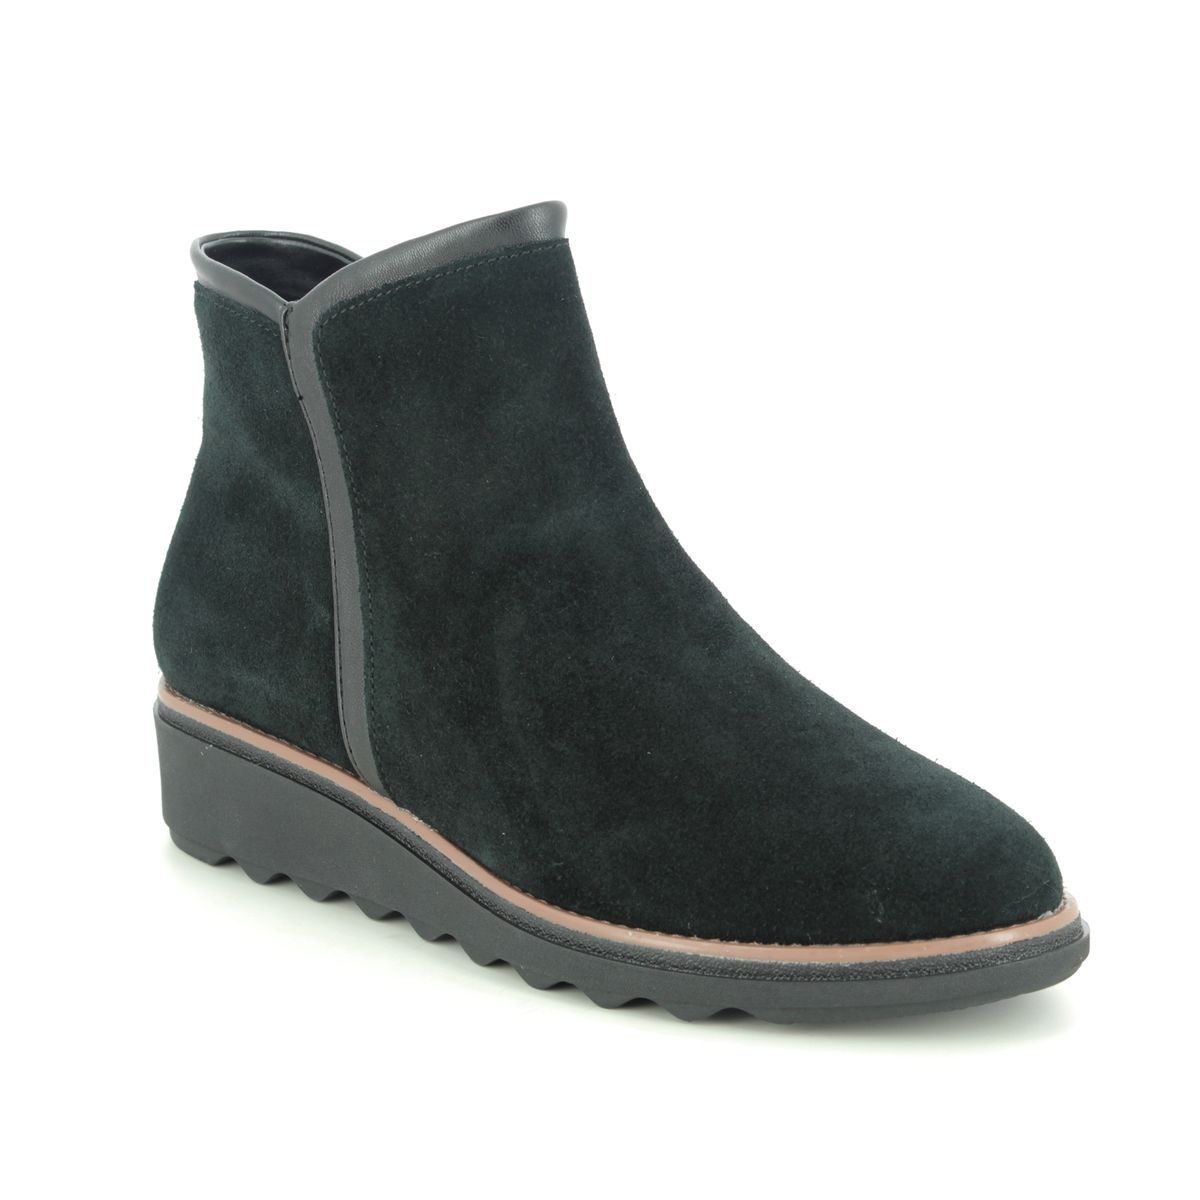 clarks black wedge boots